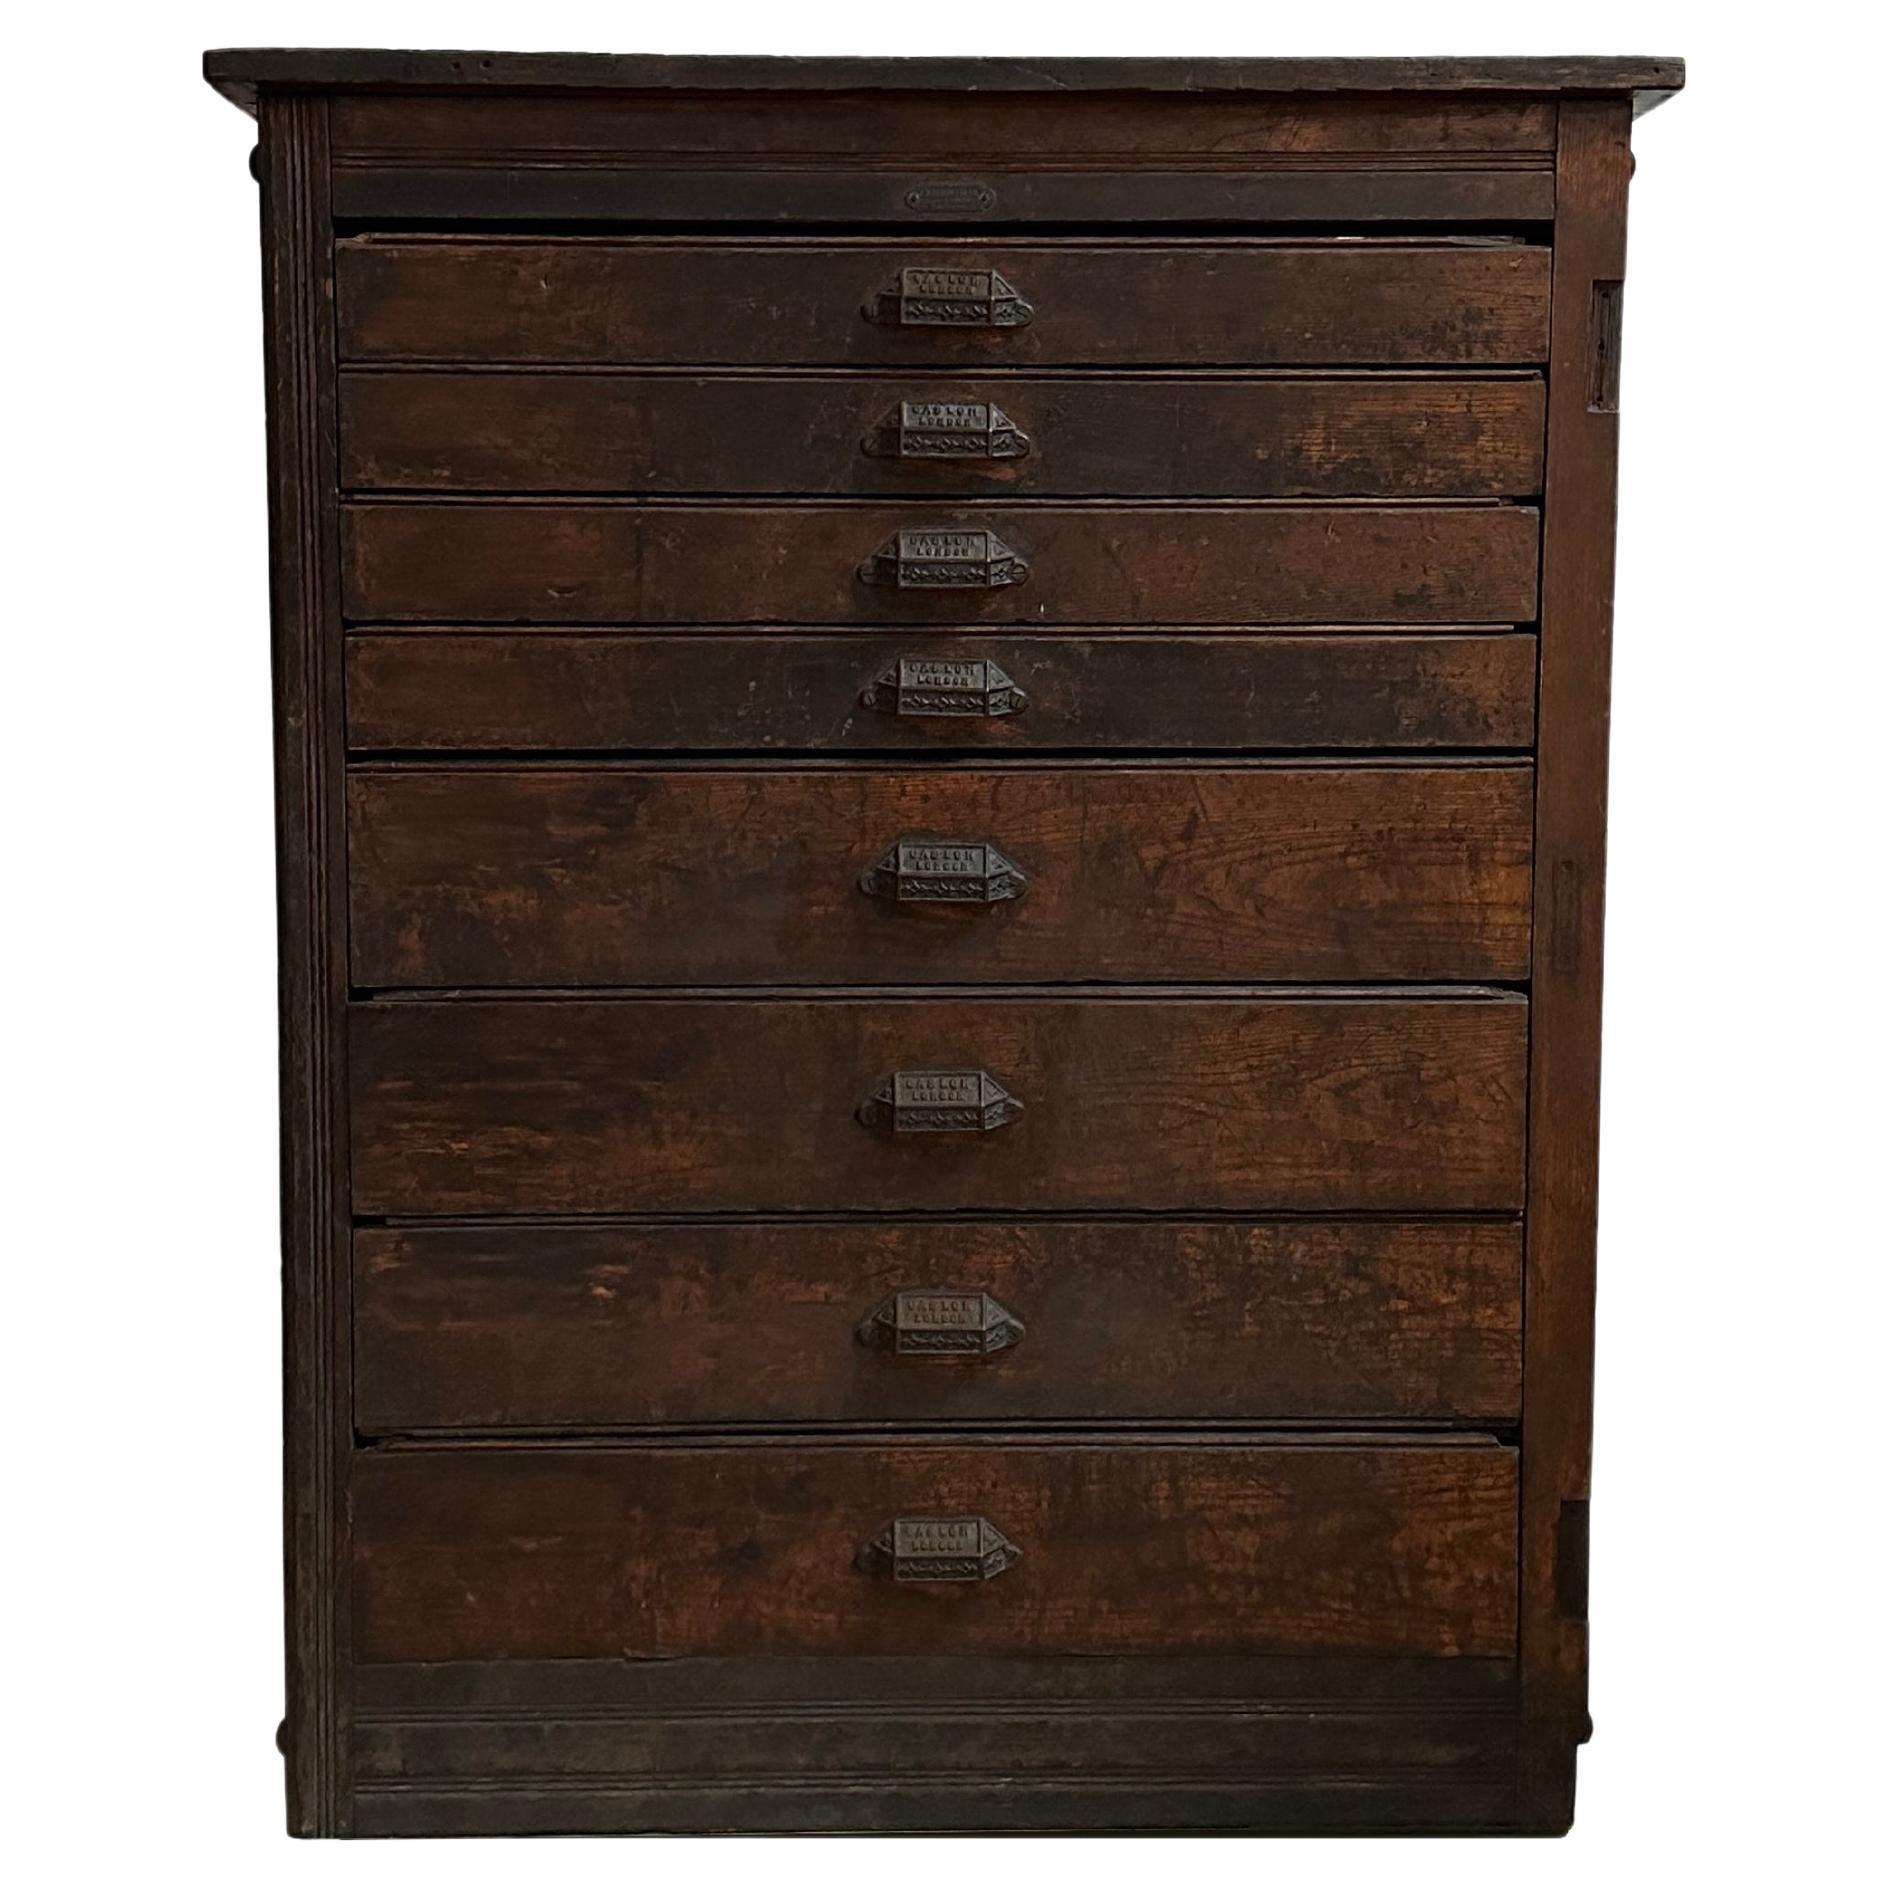 Antique Vintage Industrial English Printers Chest of Haberdashery Shop Drawers For Sale